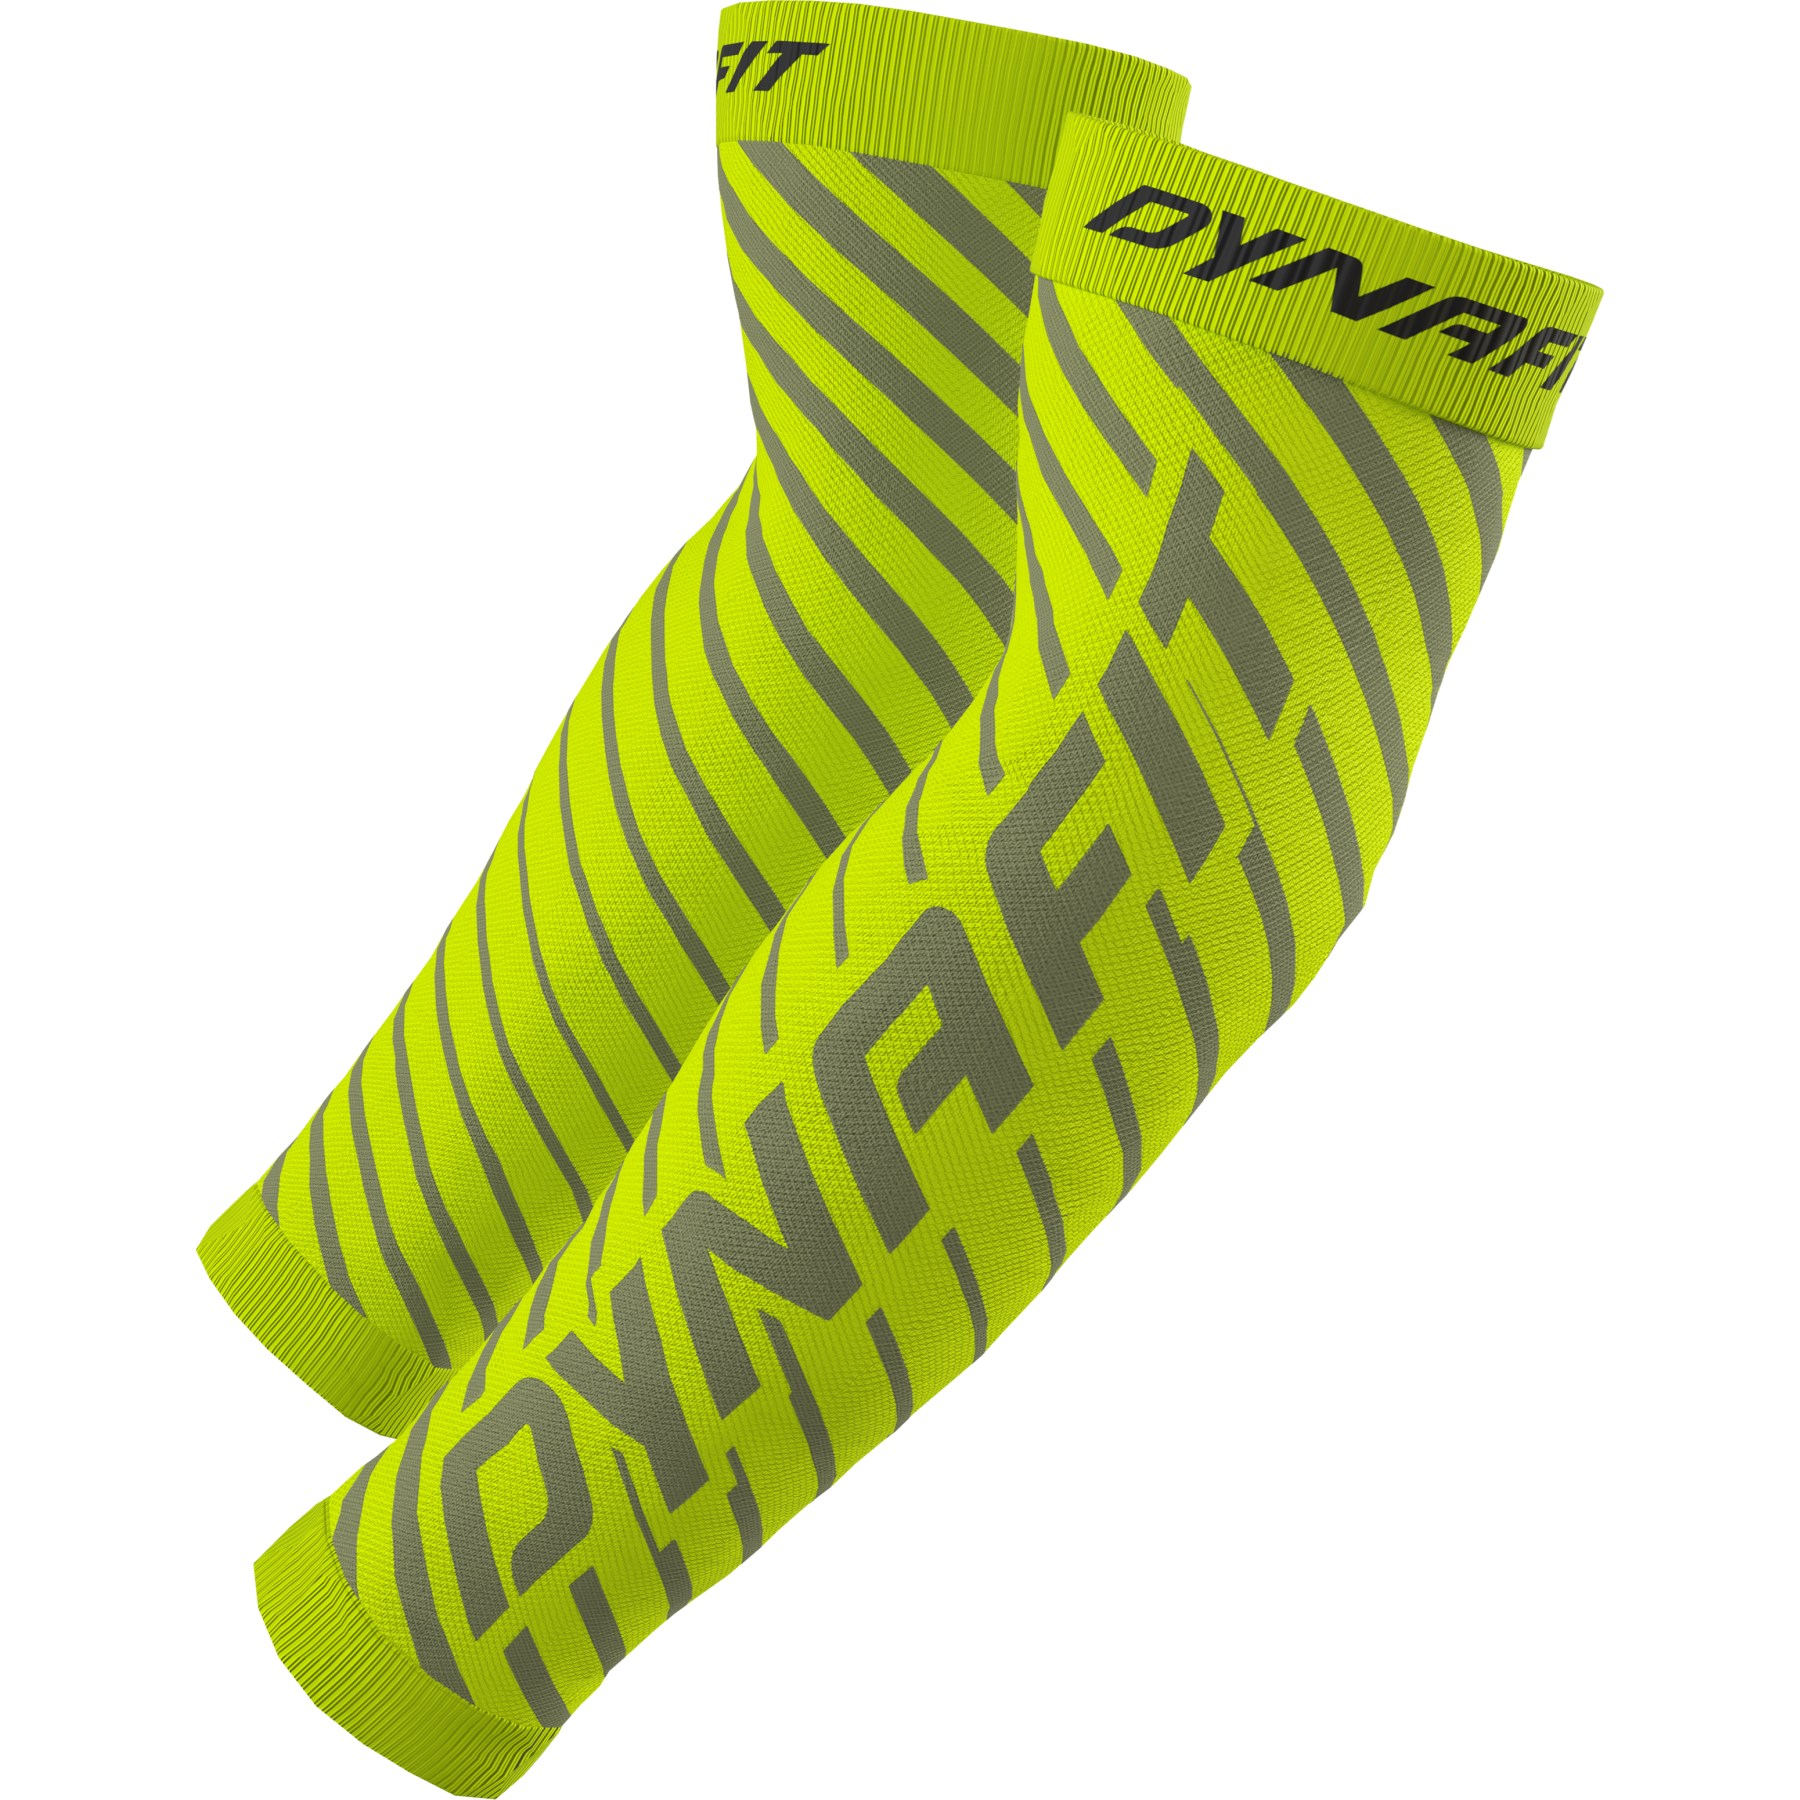 Picture of Dynafit Performance Arm Guards - Neon Yellow